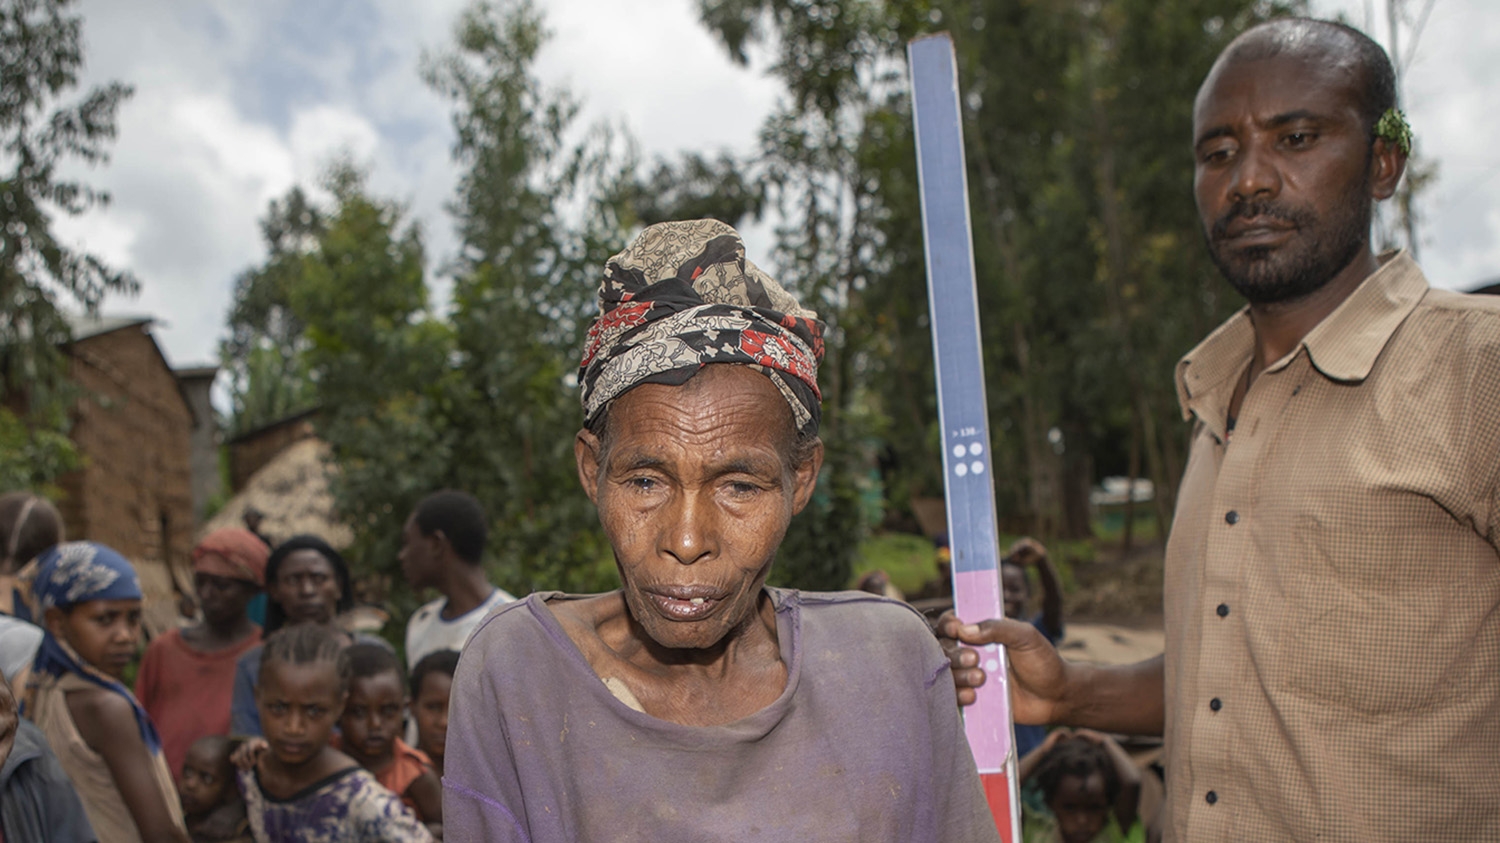 An older woman stands next to a dose pole before receiving medication for trachoma.